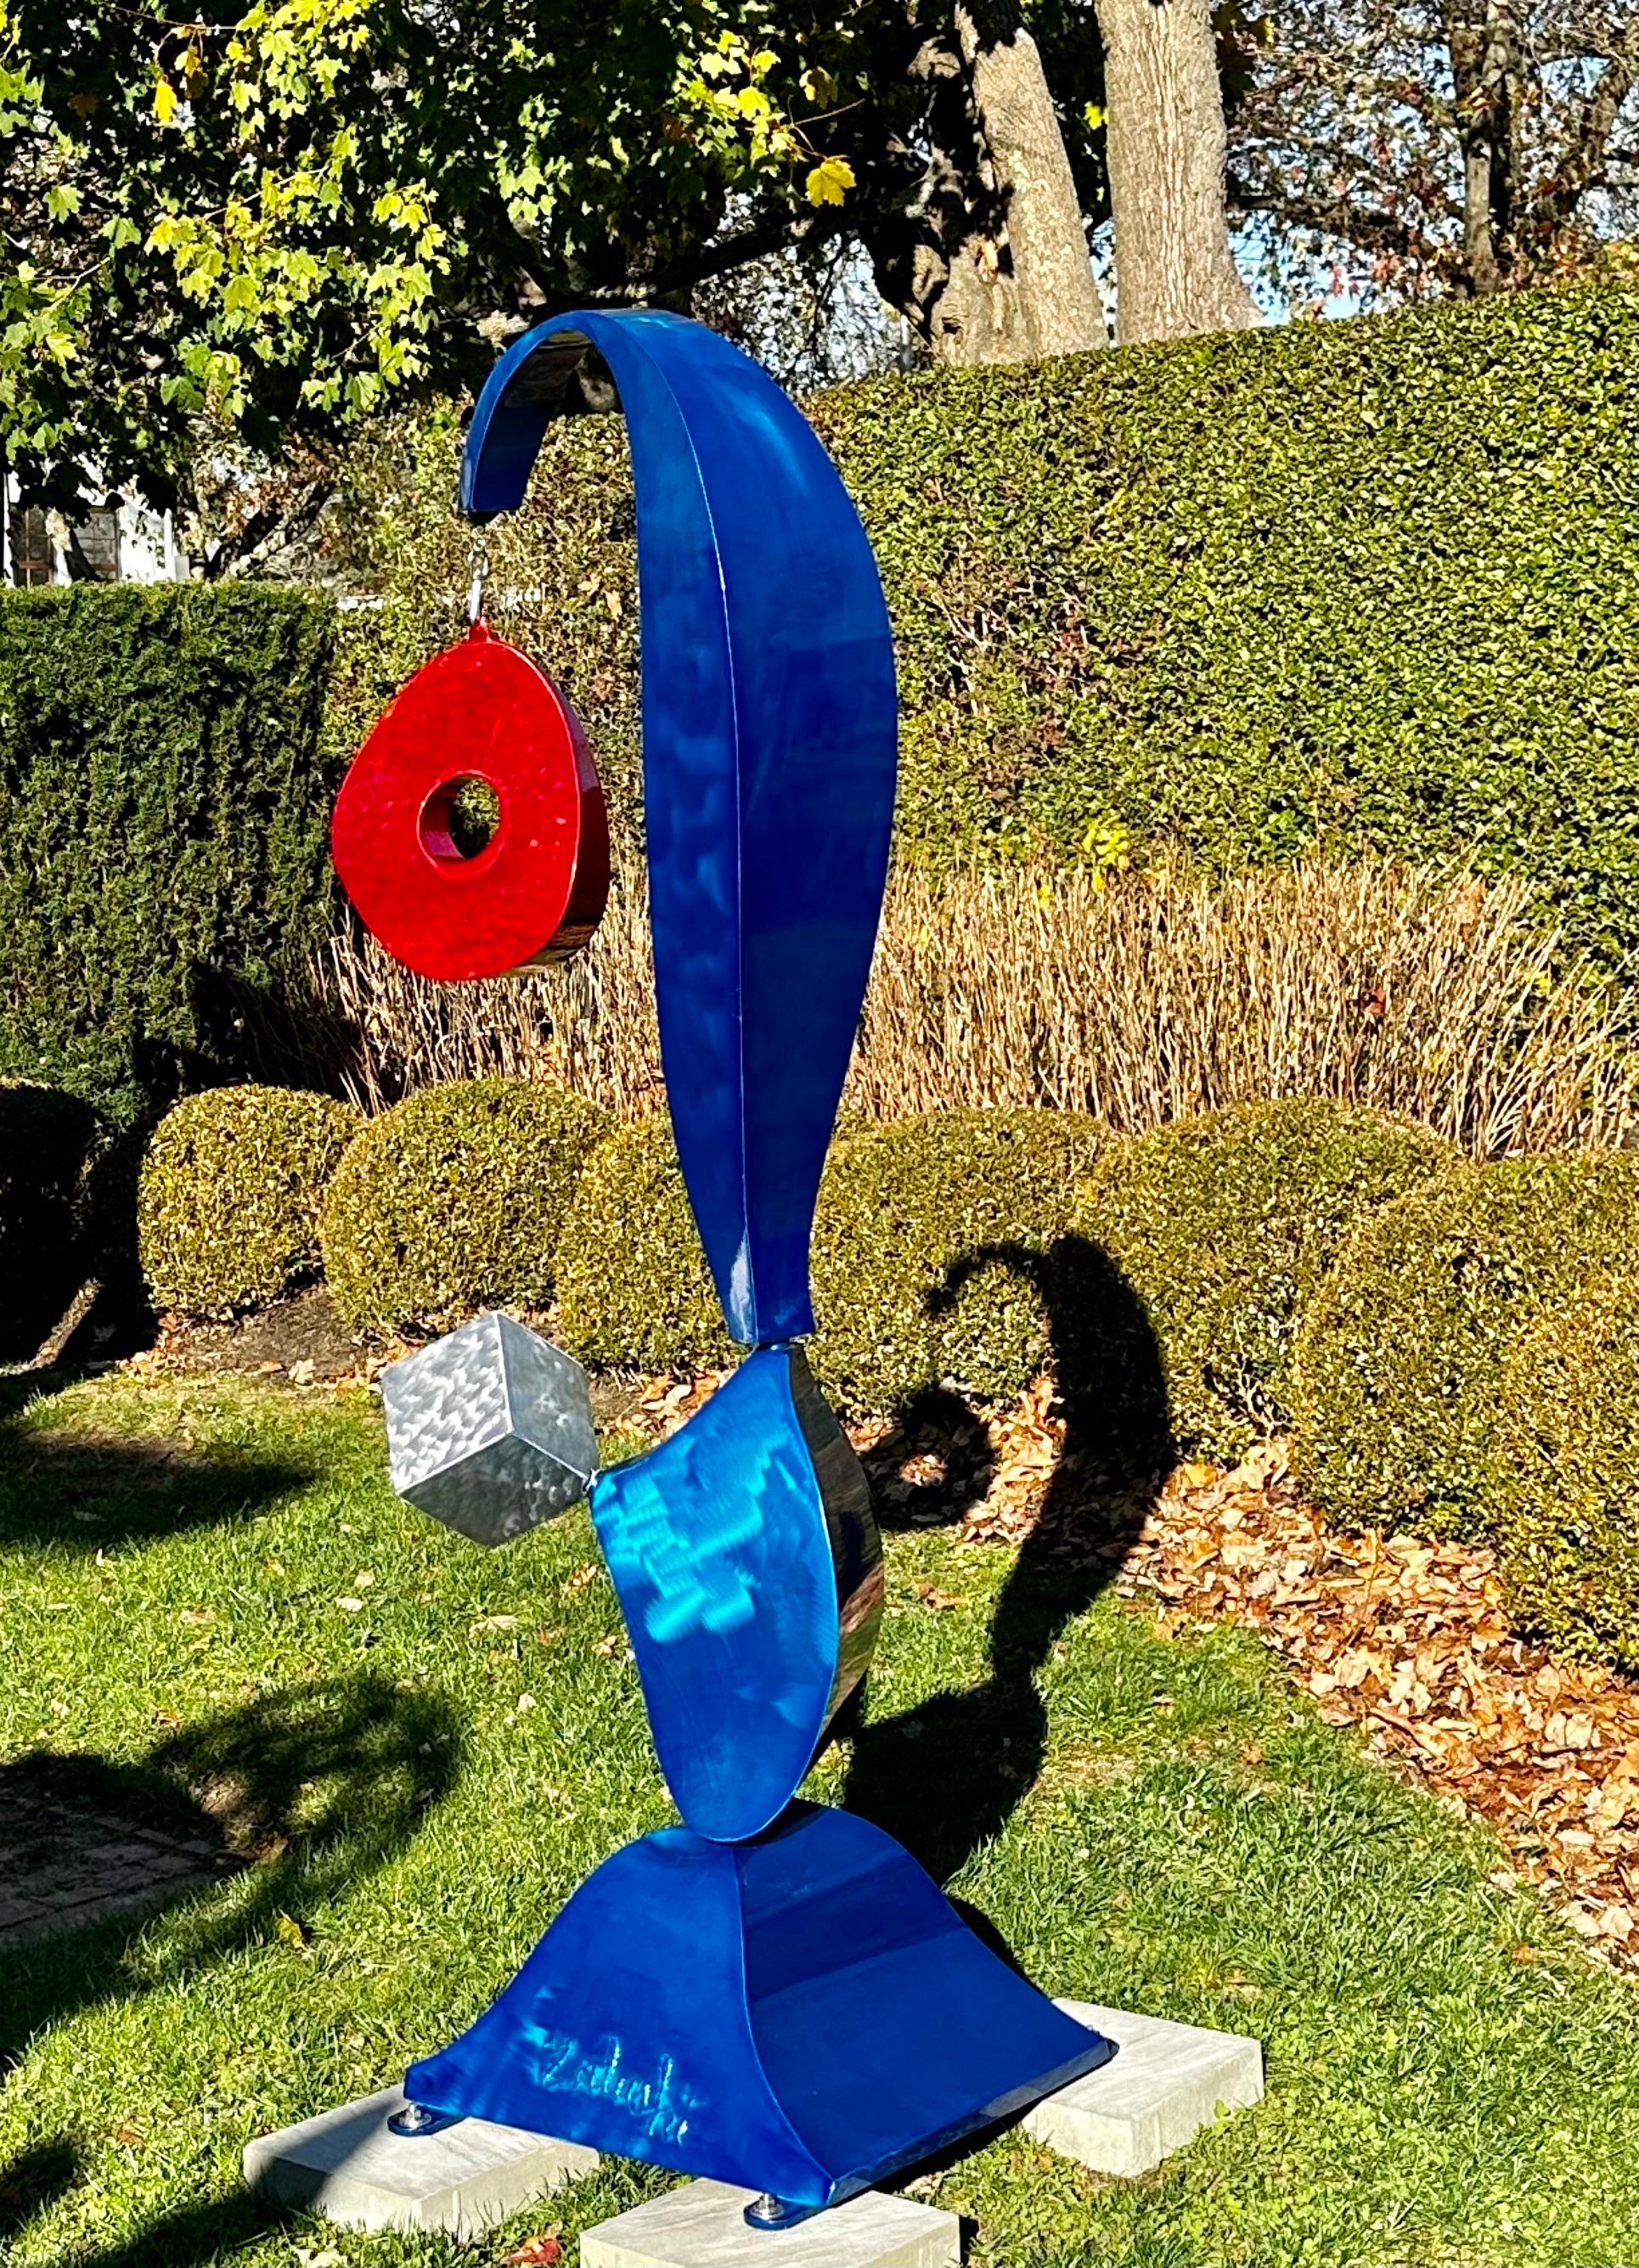 Steve Zaluski Abstract Sculpture - Improvisation in Red and Blue